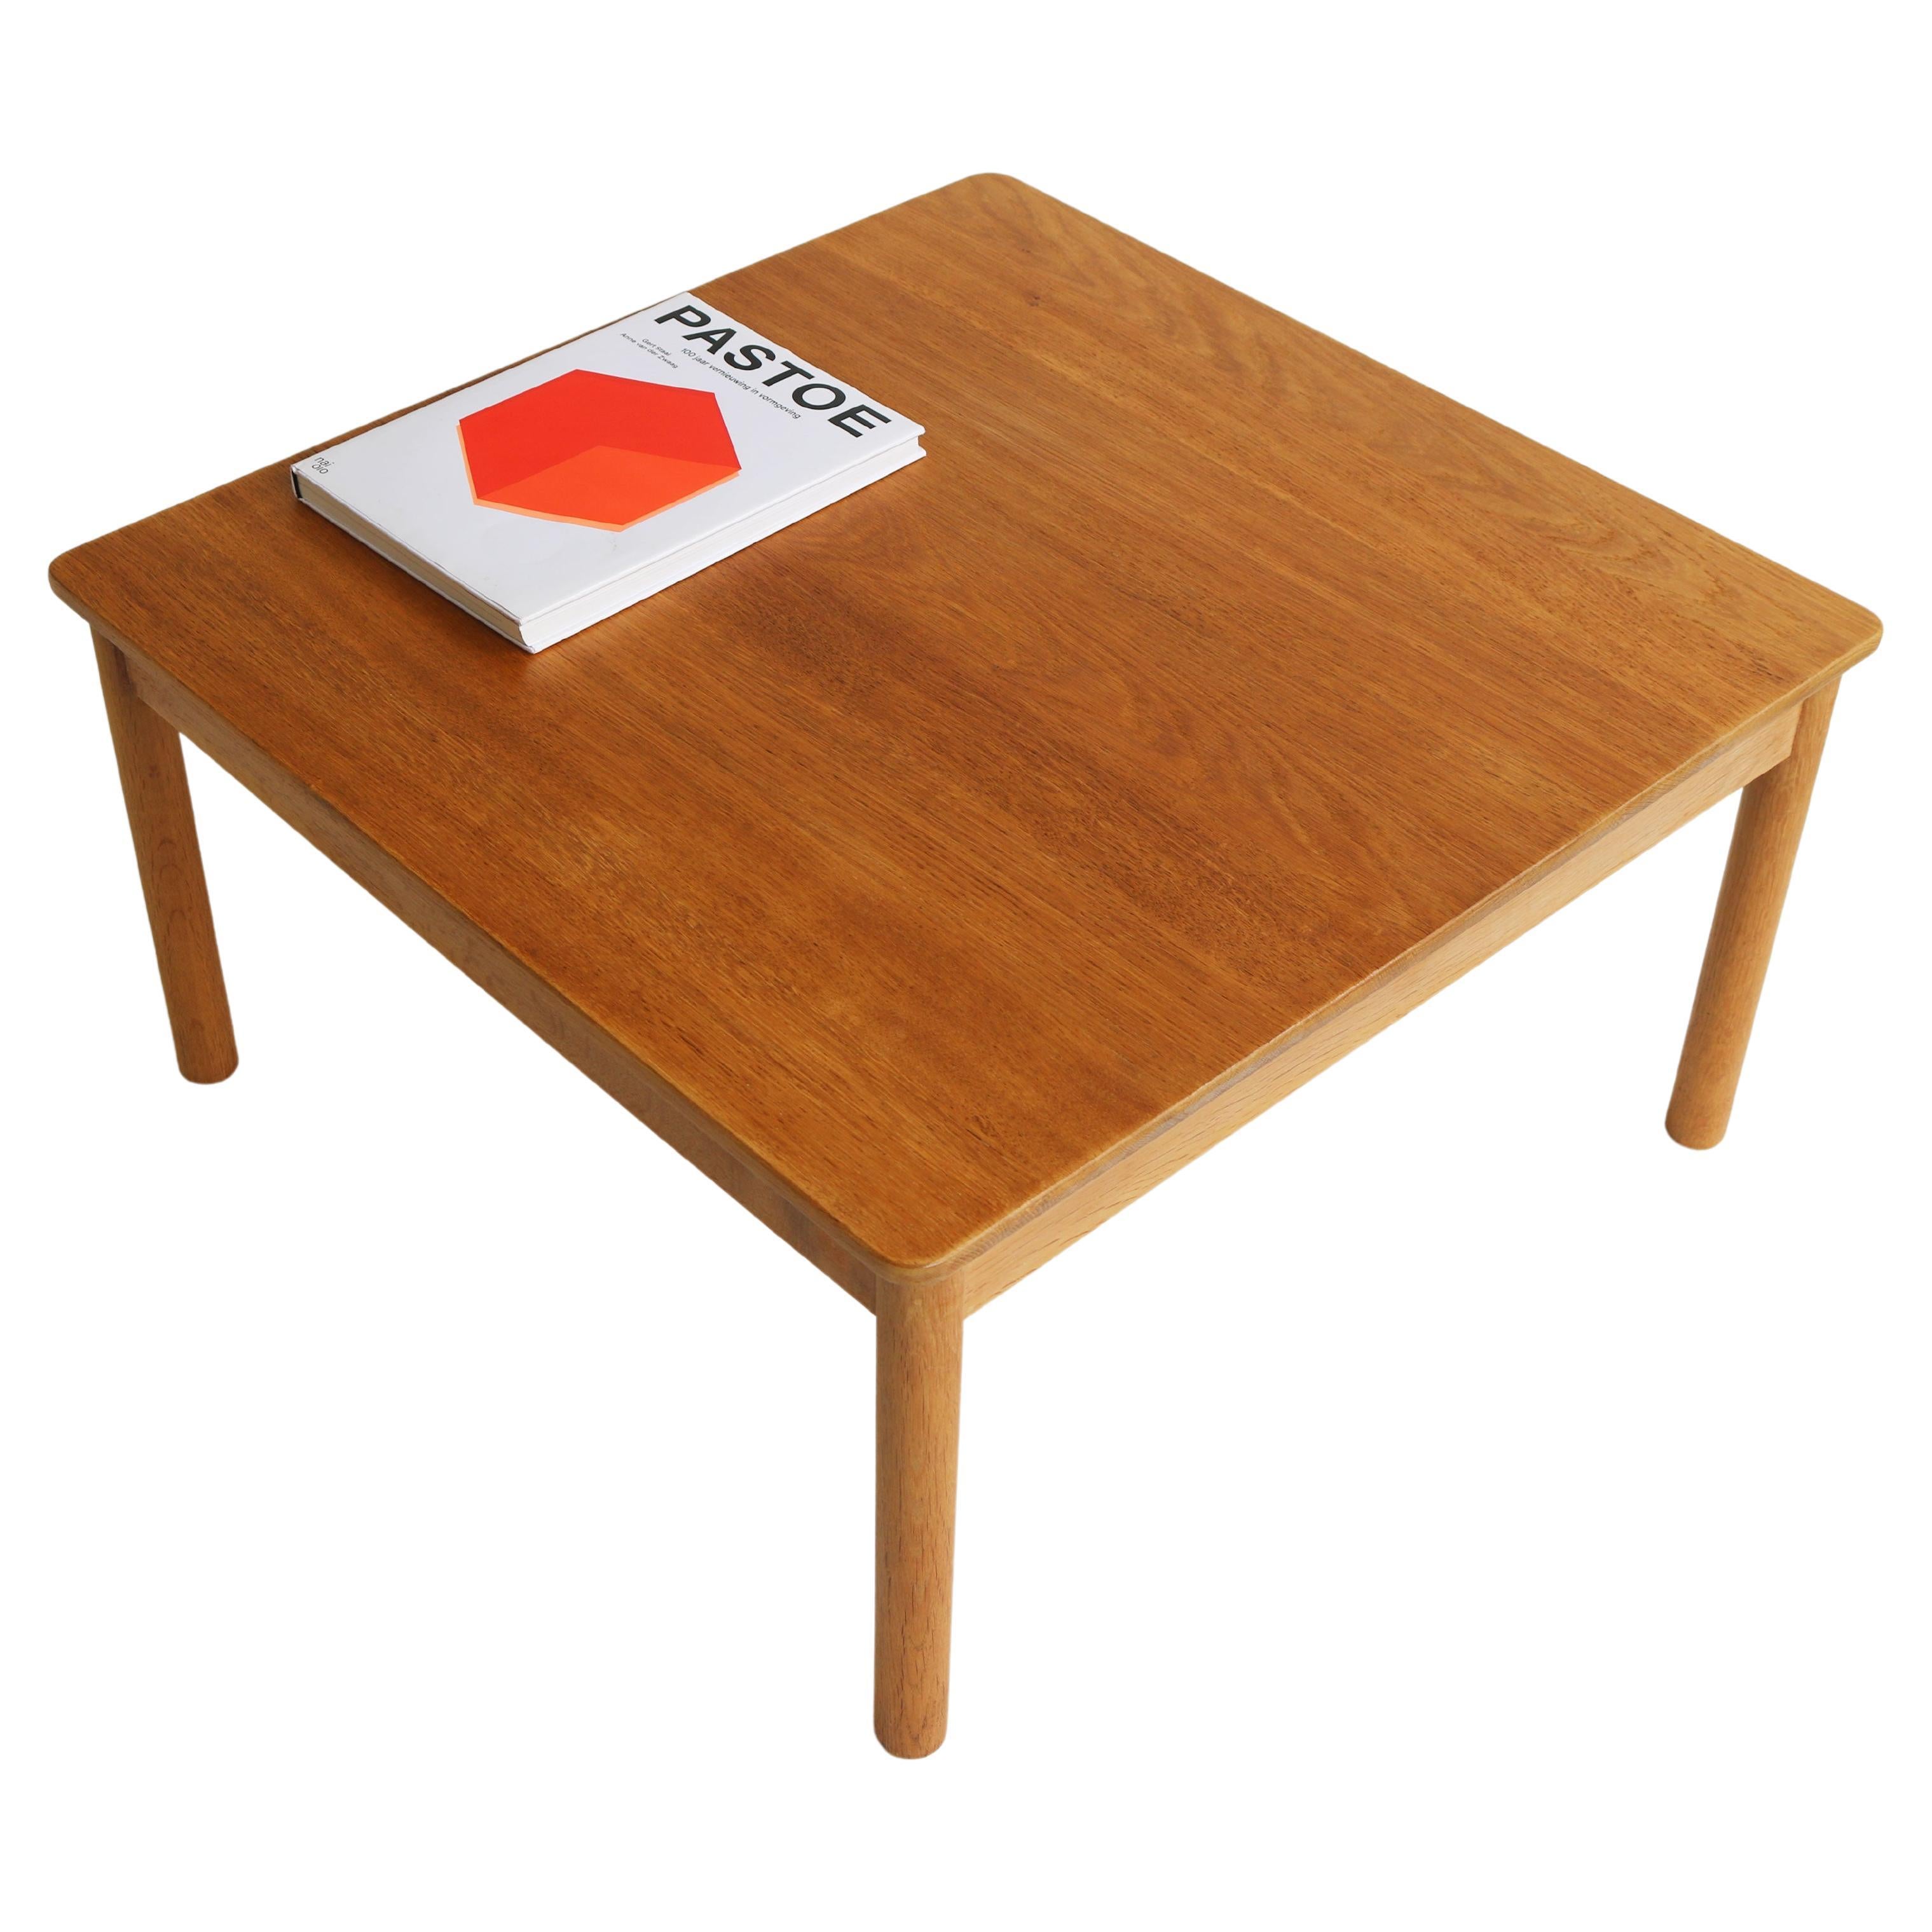 Large solid oak coffee table Model: 5351 by Borge Mogensen for Fredericia 1950 For Sale